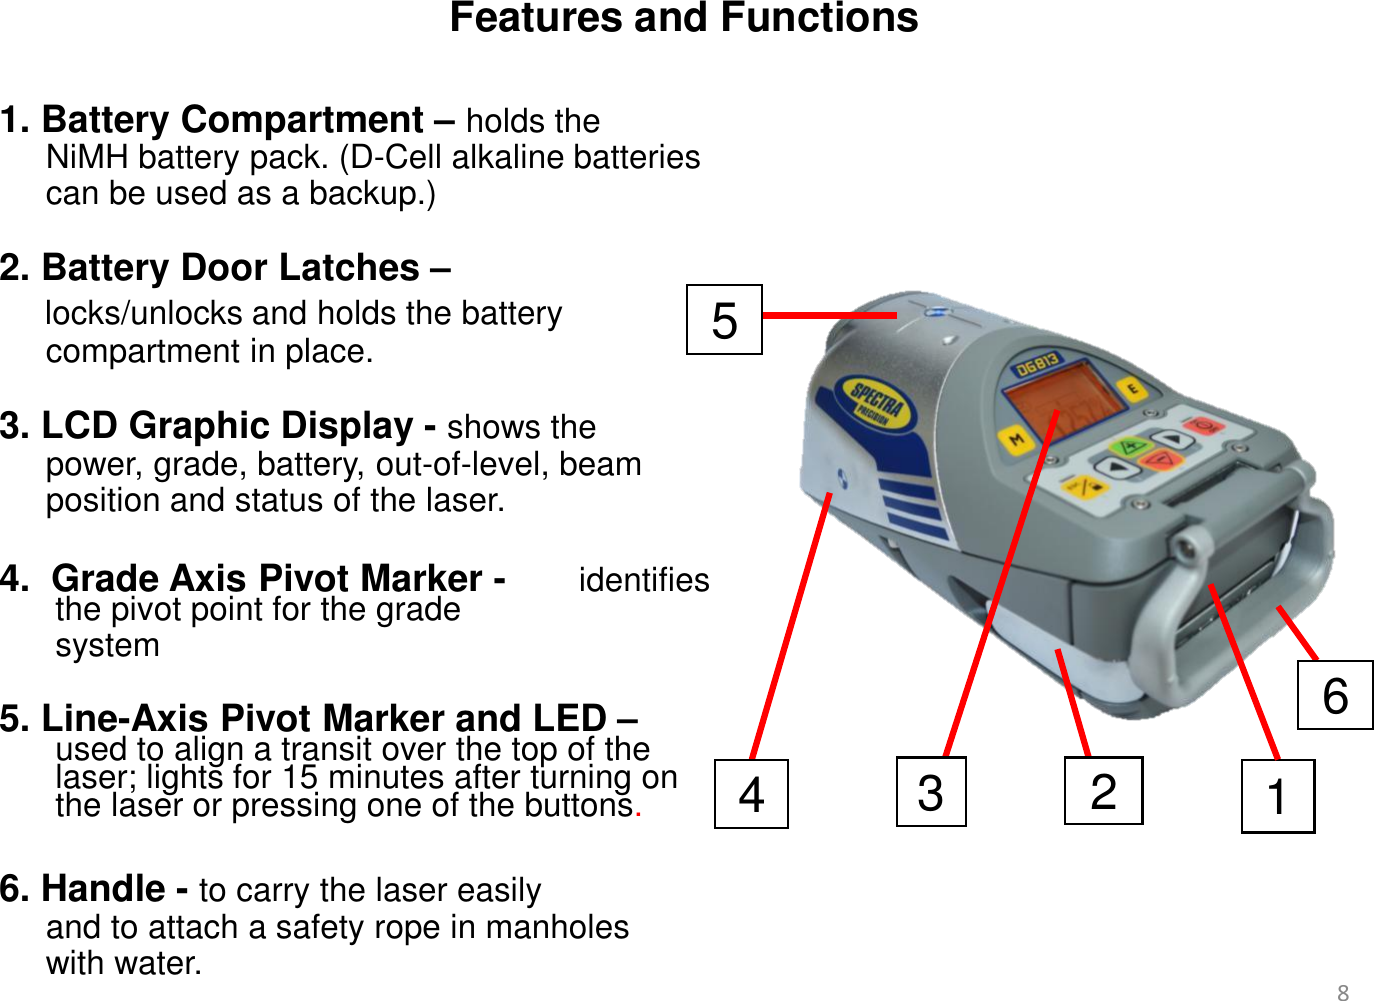 Features and Functions 1. Battery Compartment – holds the       NiMH battery pack. (D-Cell alkaline batteries      can be used as a backup.)  2. Battery Door Latches –      locks/unlocks and holds the battery       compartment in place.  3. LCD Graphic Display - shows the      power, grade, battery, out-of-level, beam      position and status of the laser.  4.  Grade Axis Pivot Marker -       identifies the pivot point for the grade        system  5. Line-Axis Pivot Marker and LED – used to align a transit over the top of the laser; lights for 15 minutes after turning on the laser or pressing one of the buttons.  6. Handle - to carry the laser easily      and to attach a safety rope in manholes       with water.    1 4  3  2 5 6 8 